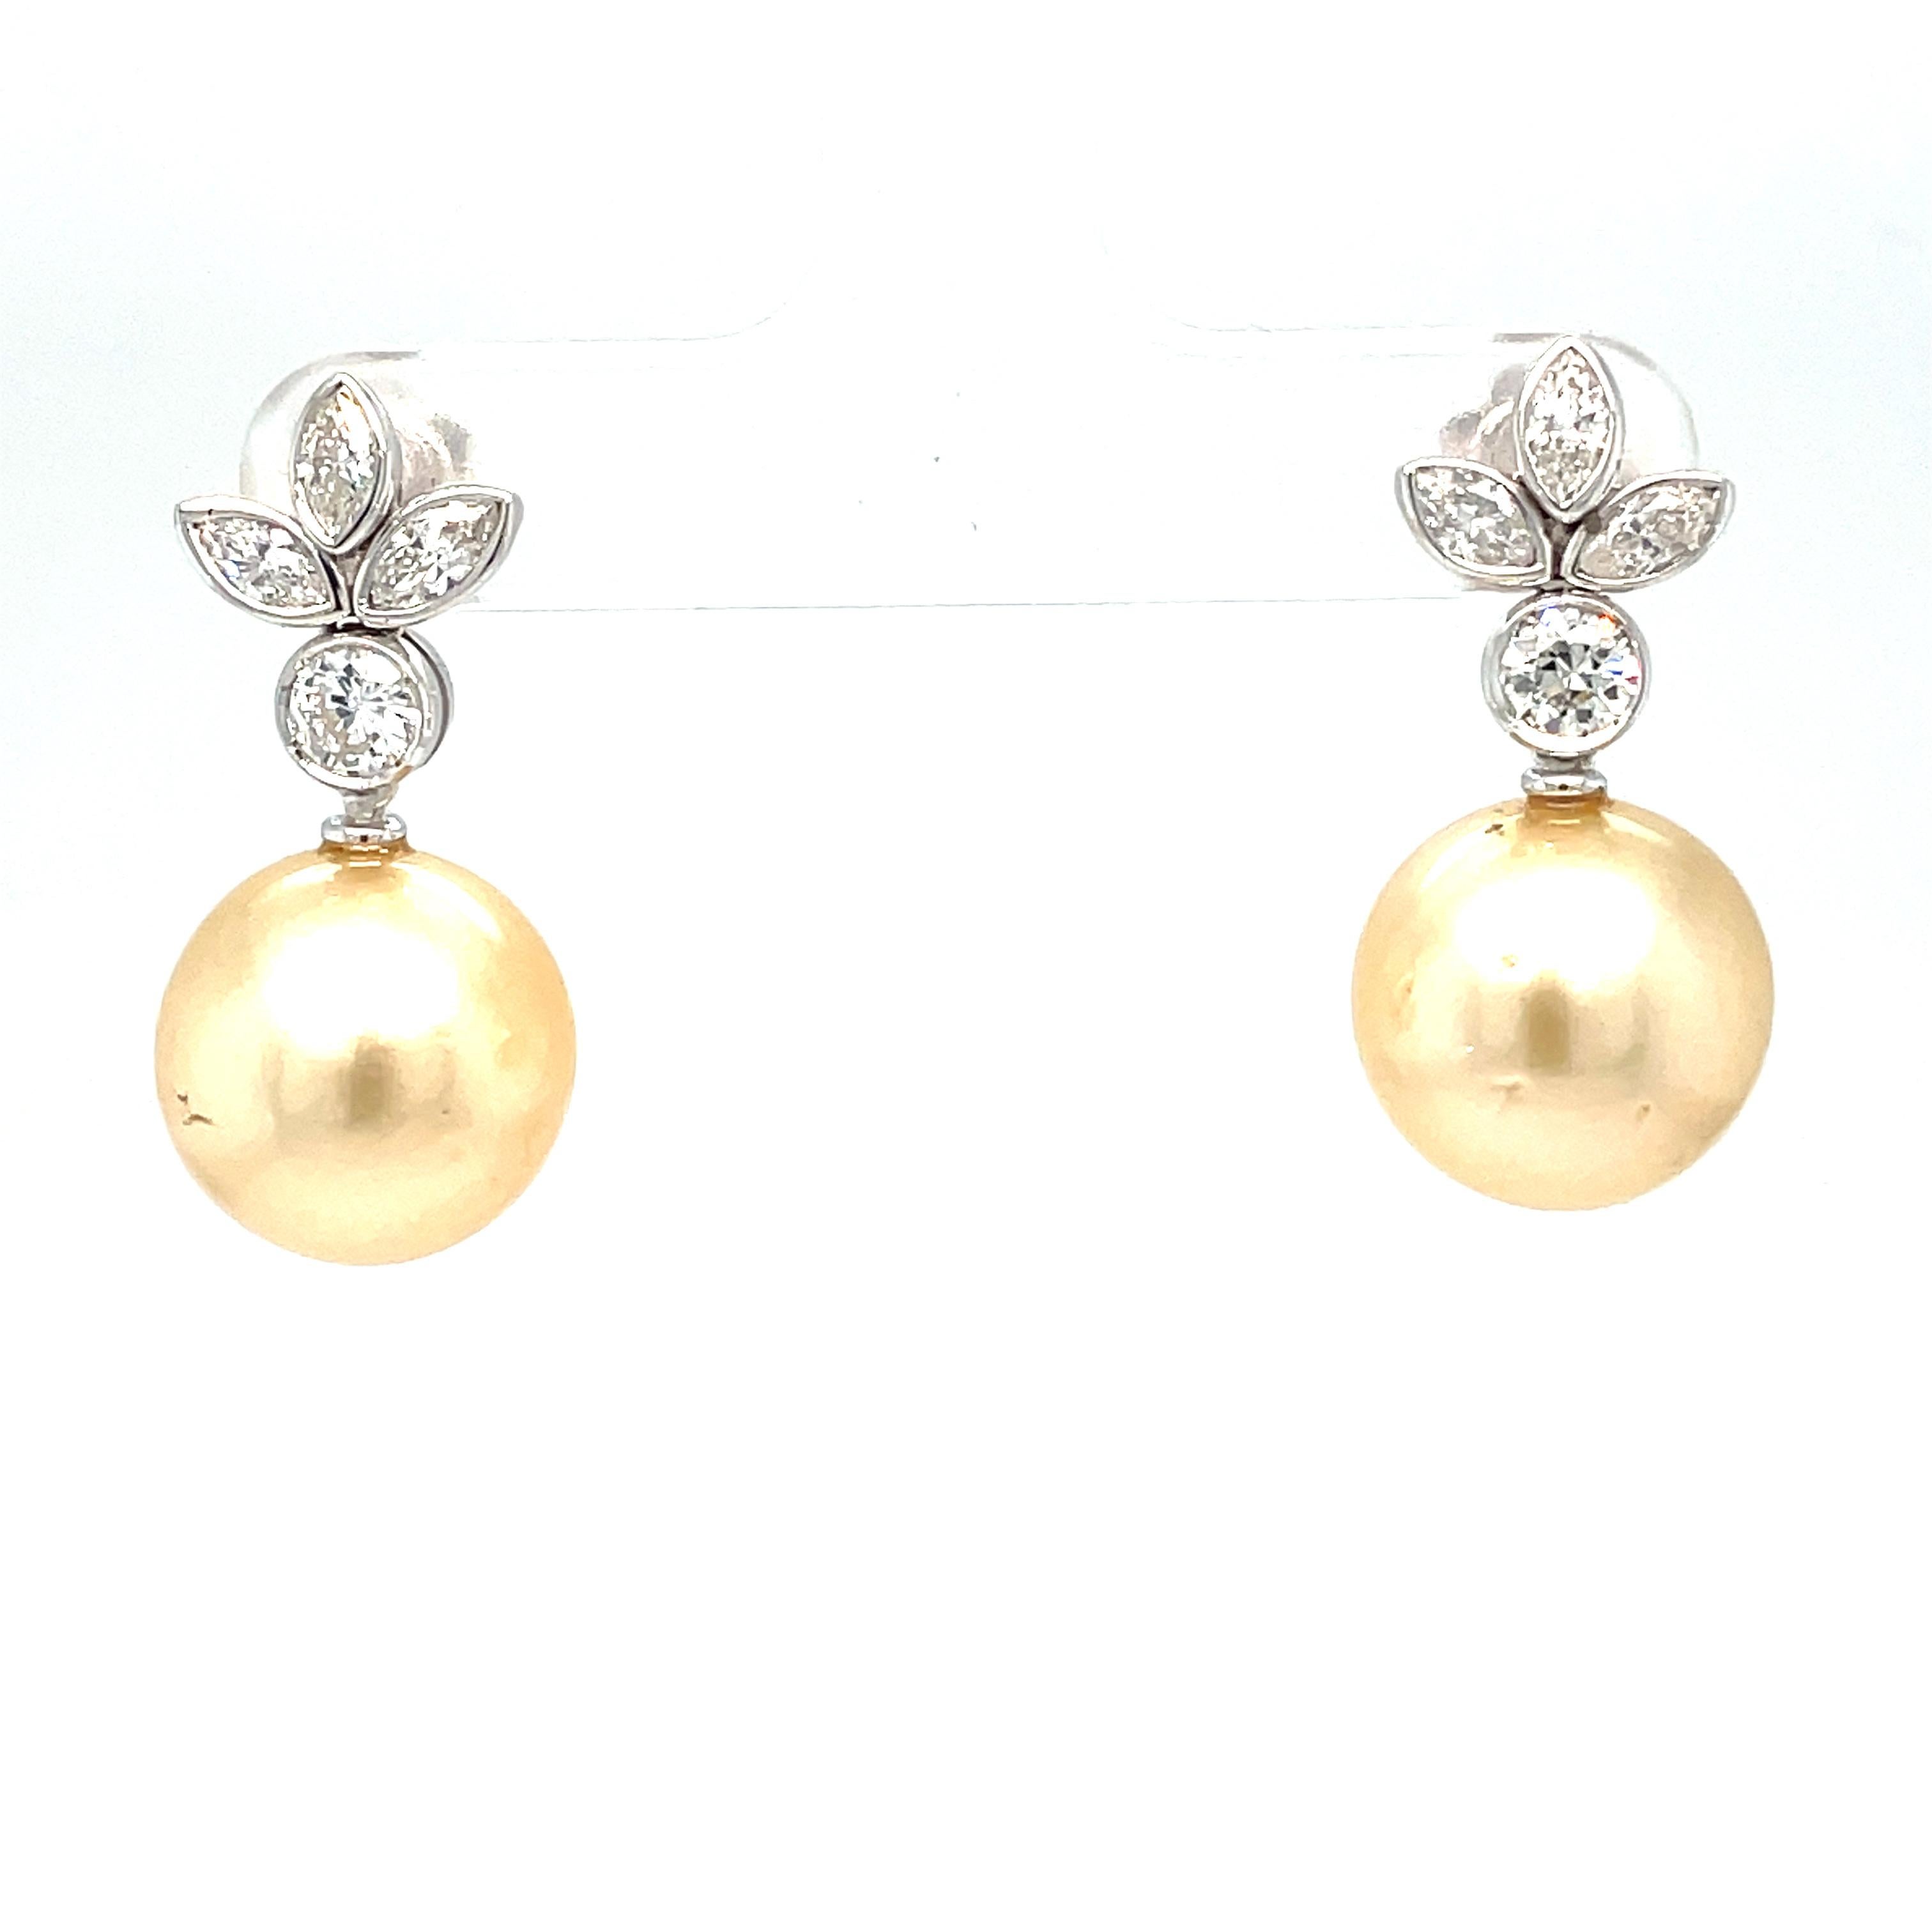 Charming Earrings in 18k white gold with two high quality Australian south sea pearls, 12,70 mm, of perfect shape and color, and sparkling round brilliant cut and marquise diamonds, graded H/G color Vvs Clarity, total weight 1.40 carats.
Made in